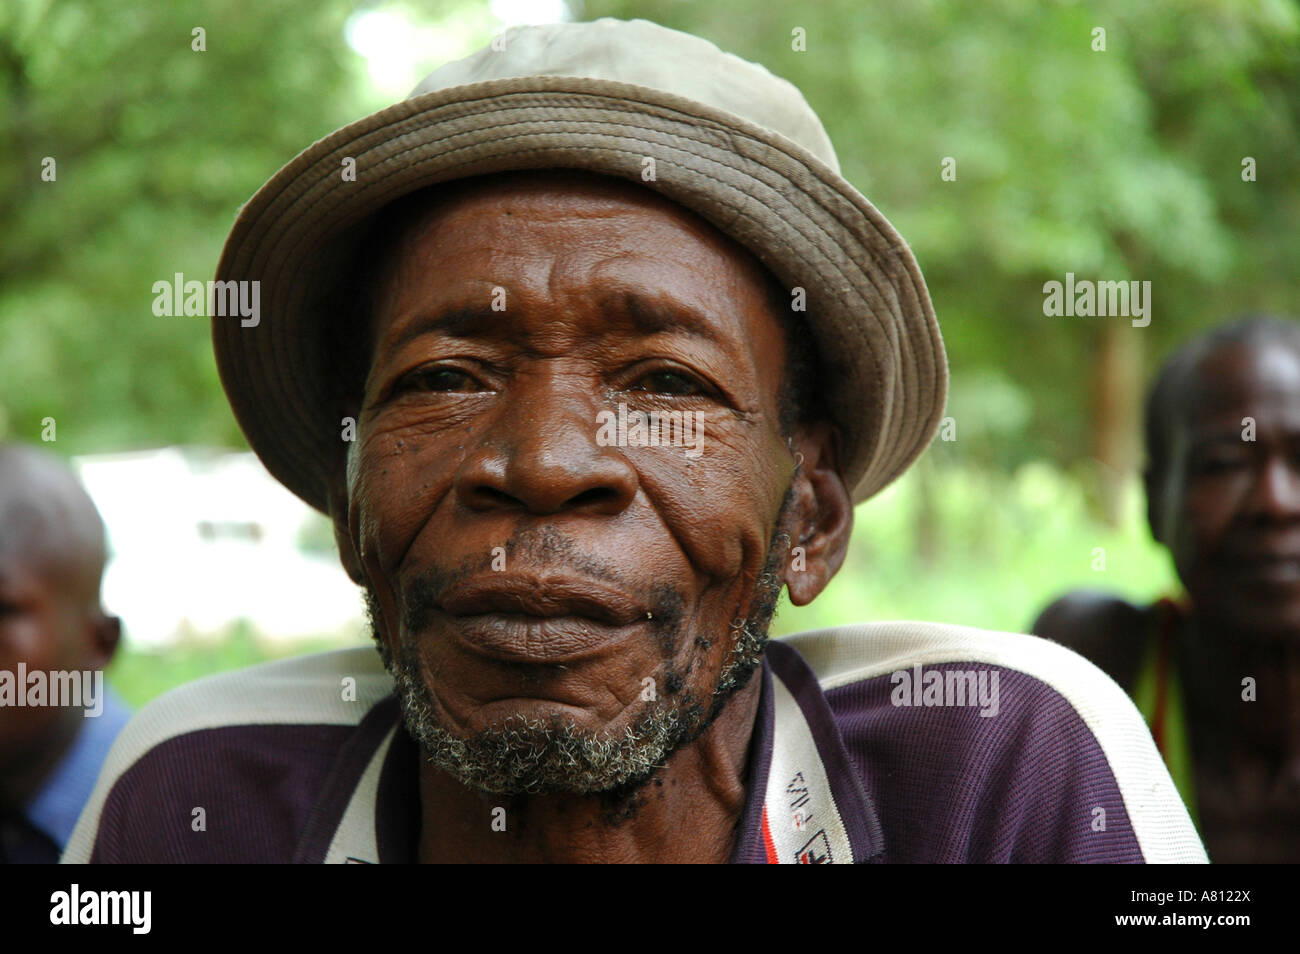 Old man with hat Stock Photo